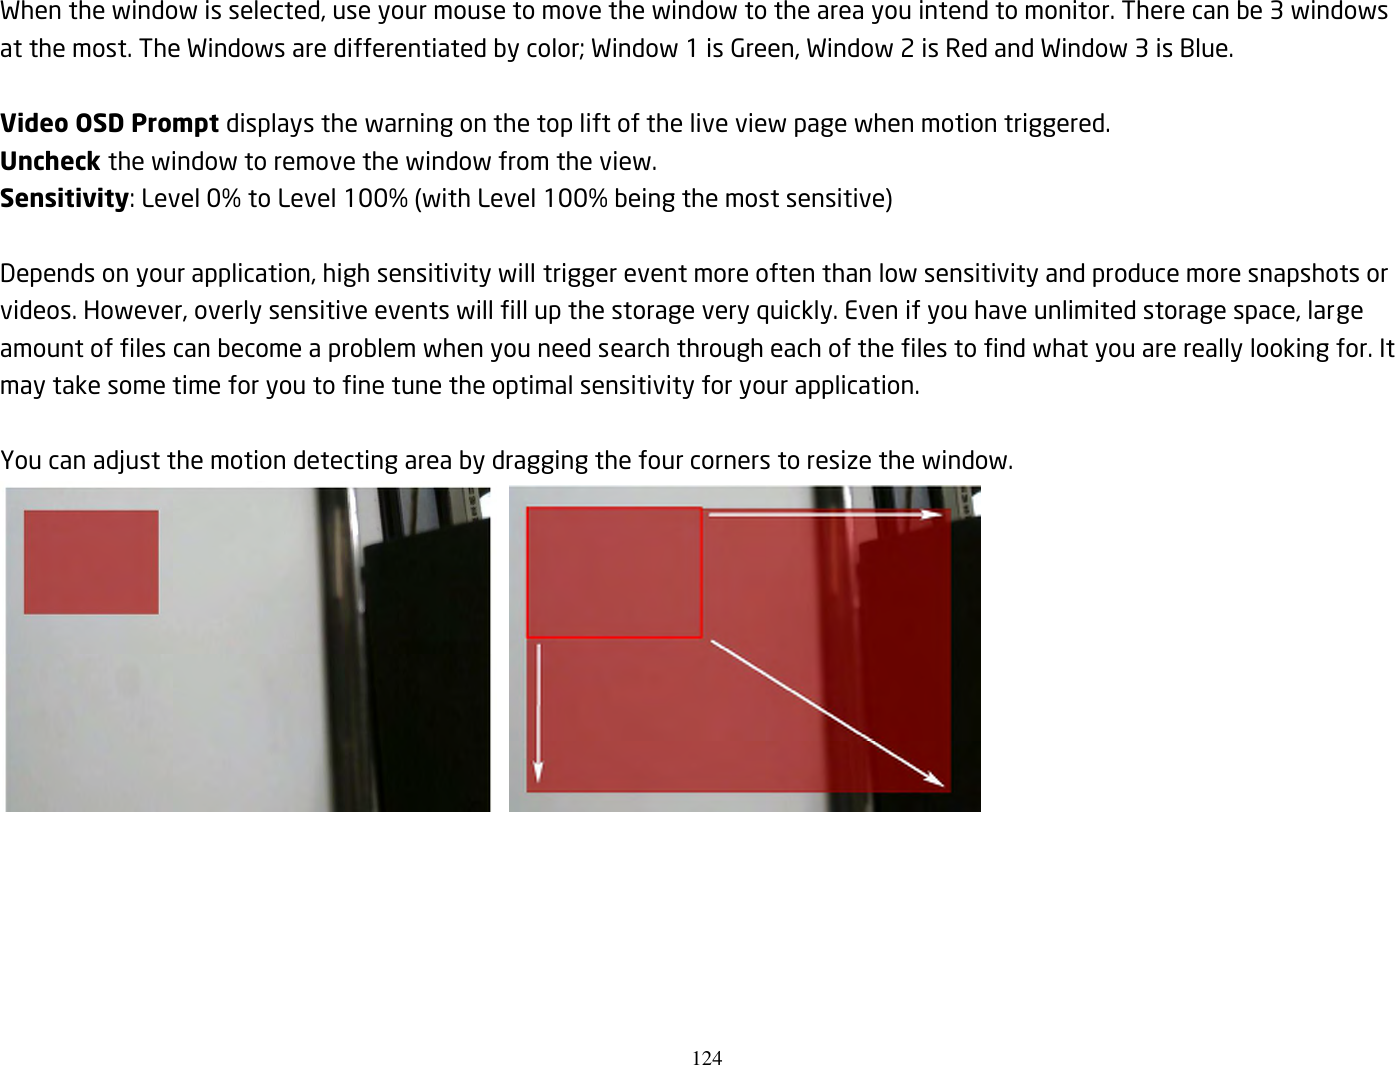 124  When the window is selected, use your mouse to move the window to the area you intend to monitor. There can be 3 windows at the most. The Windows are differentiated by color; Window 1 is Green, Window 2 is Red and Window 3 is Blue.  Video OSD Prompt displays the warning on the top lift of the live view page when motion triggered. Uncheck the window to remove the window from the view. Sensitivity: Level 0% to Level 100% (with Level 100% being the most sensitive)  Depends on your application, high sensitivity will trigger event more often than low sensitivity and produce more snapshots or videos. However, overly sensitive events will fill up the storage very quickly. Even if you have unlimited storage space, large amount of files can become a problem when you need search through each of the files to find what you are really looking for. It may take some time for you to fine tune the optimal sensitivity for your application.  You can adjust the motion detecting area by dragging the four corners to resize the window.           